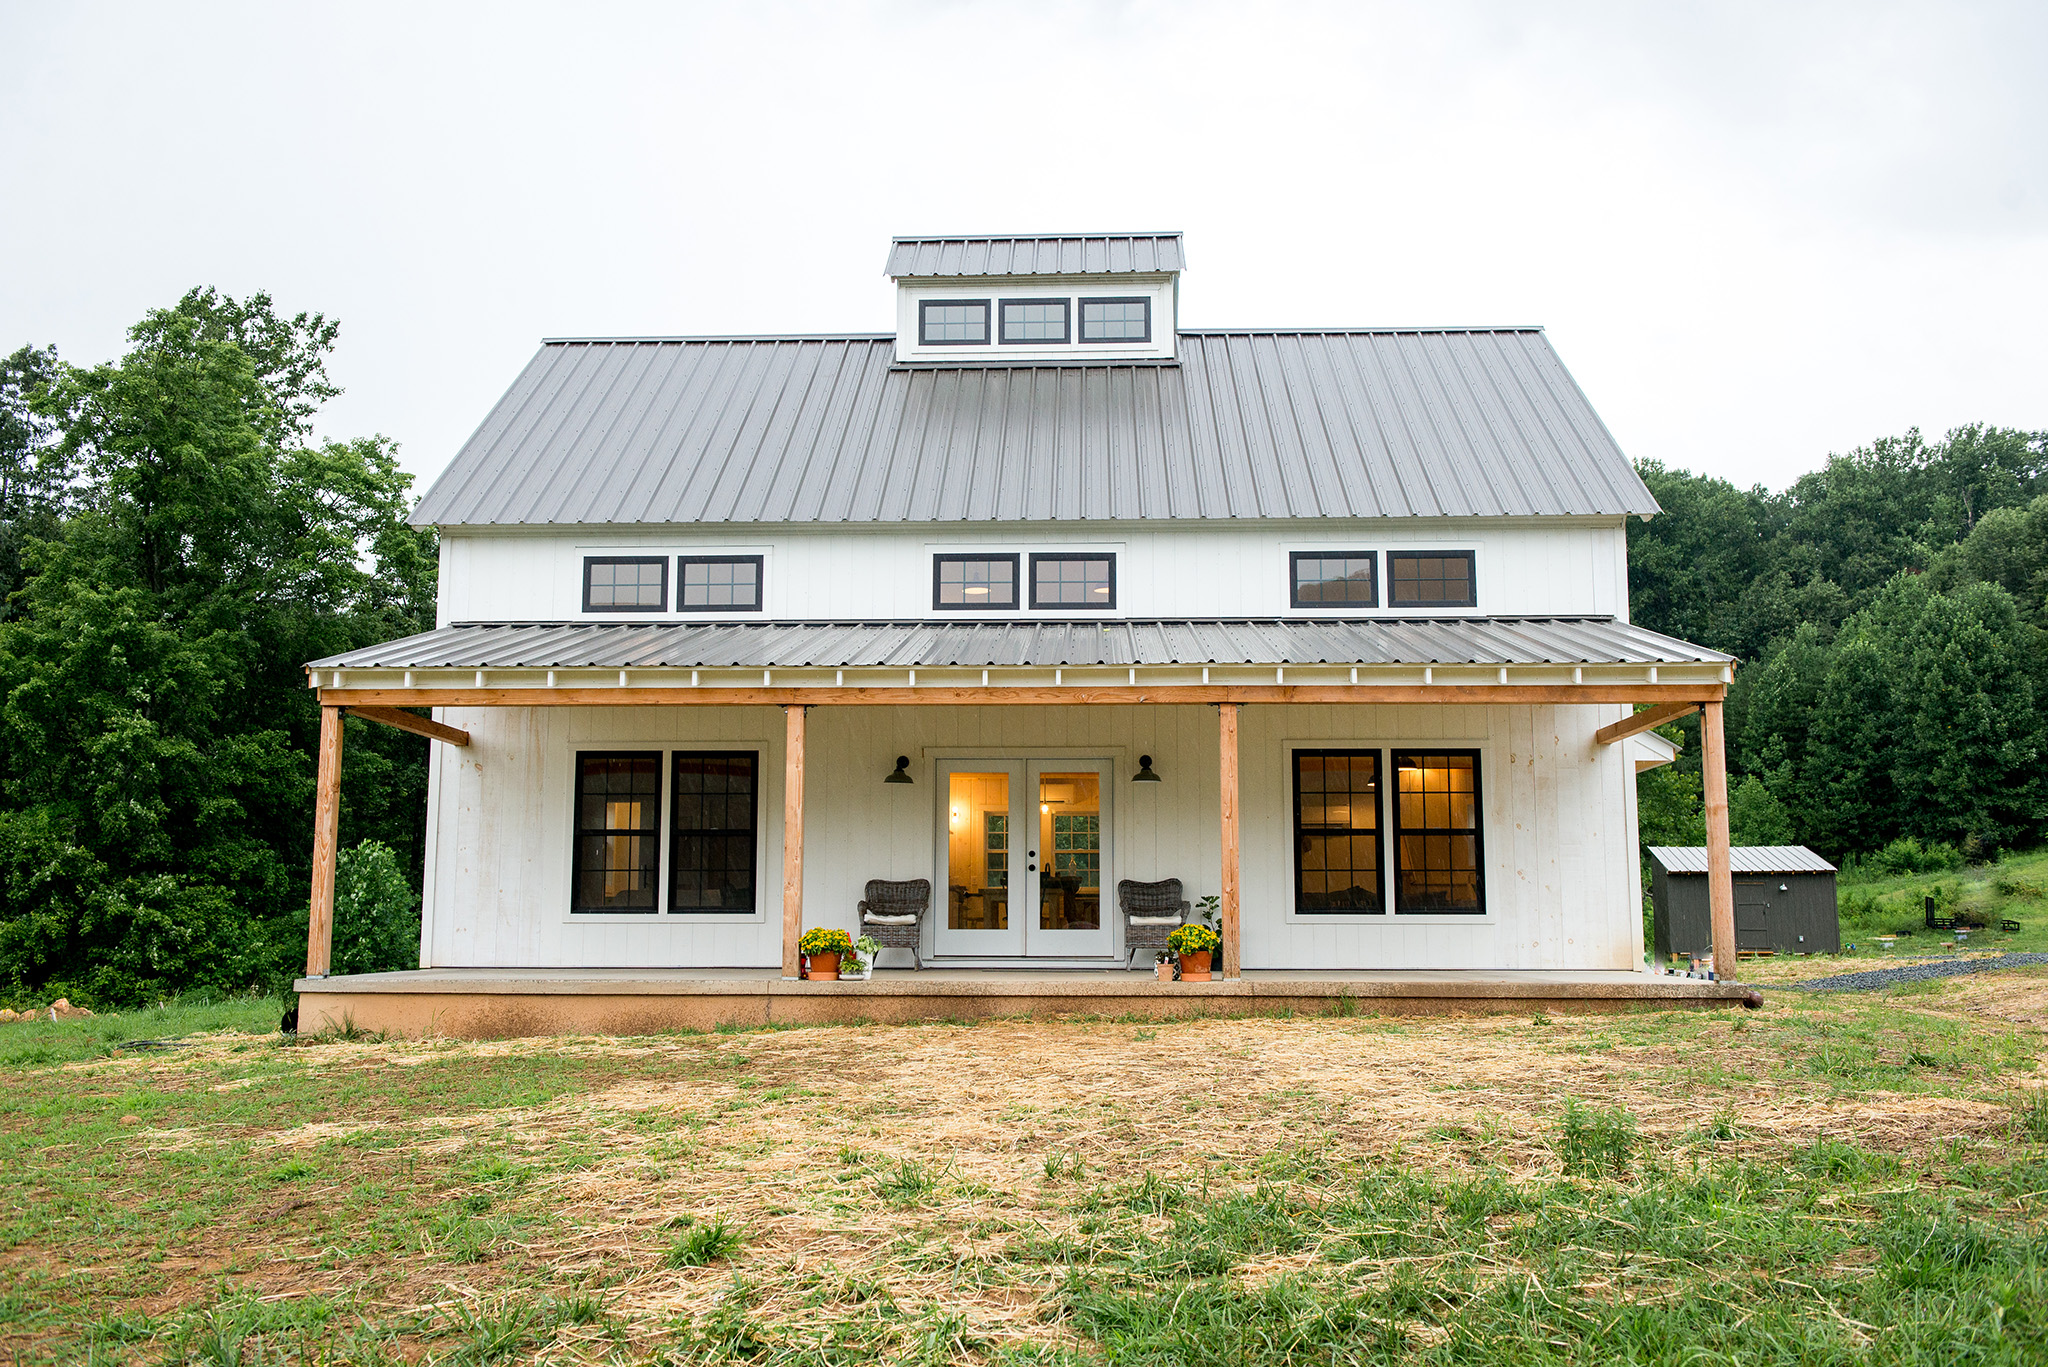 An exterior picture of the Shenandoah Modern Farmhouse, designed and built by Geobarns, with white wood siding, gray metal roof, wide front porch, Douglas fir trim, french door entry, and cupola.